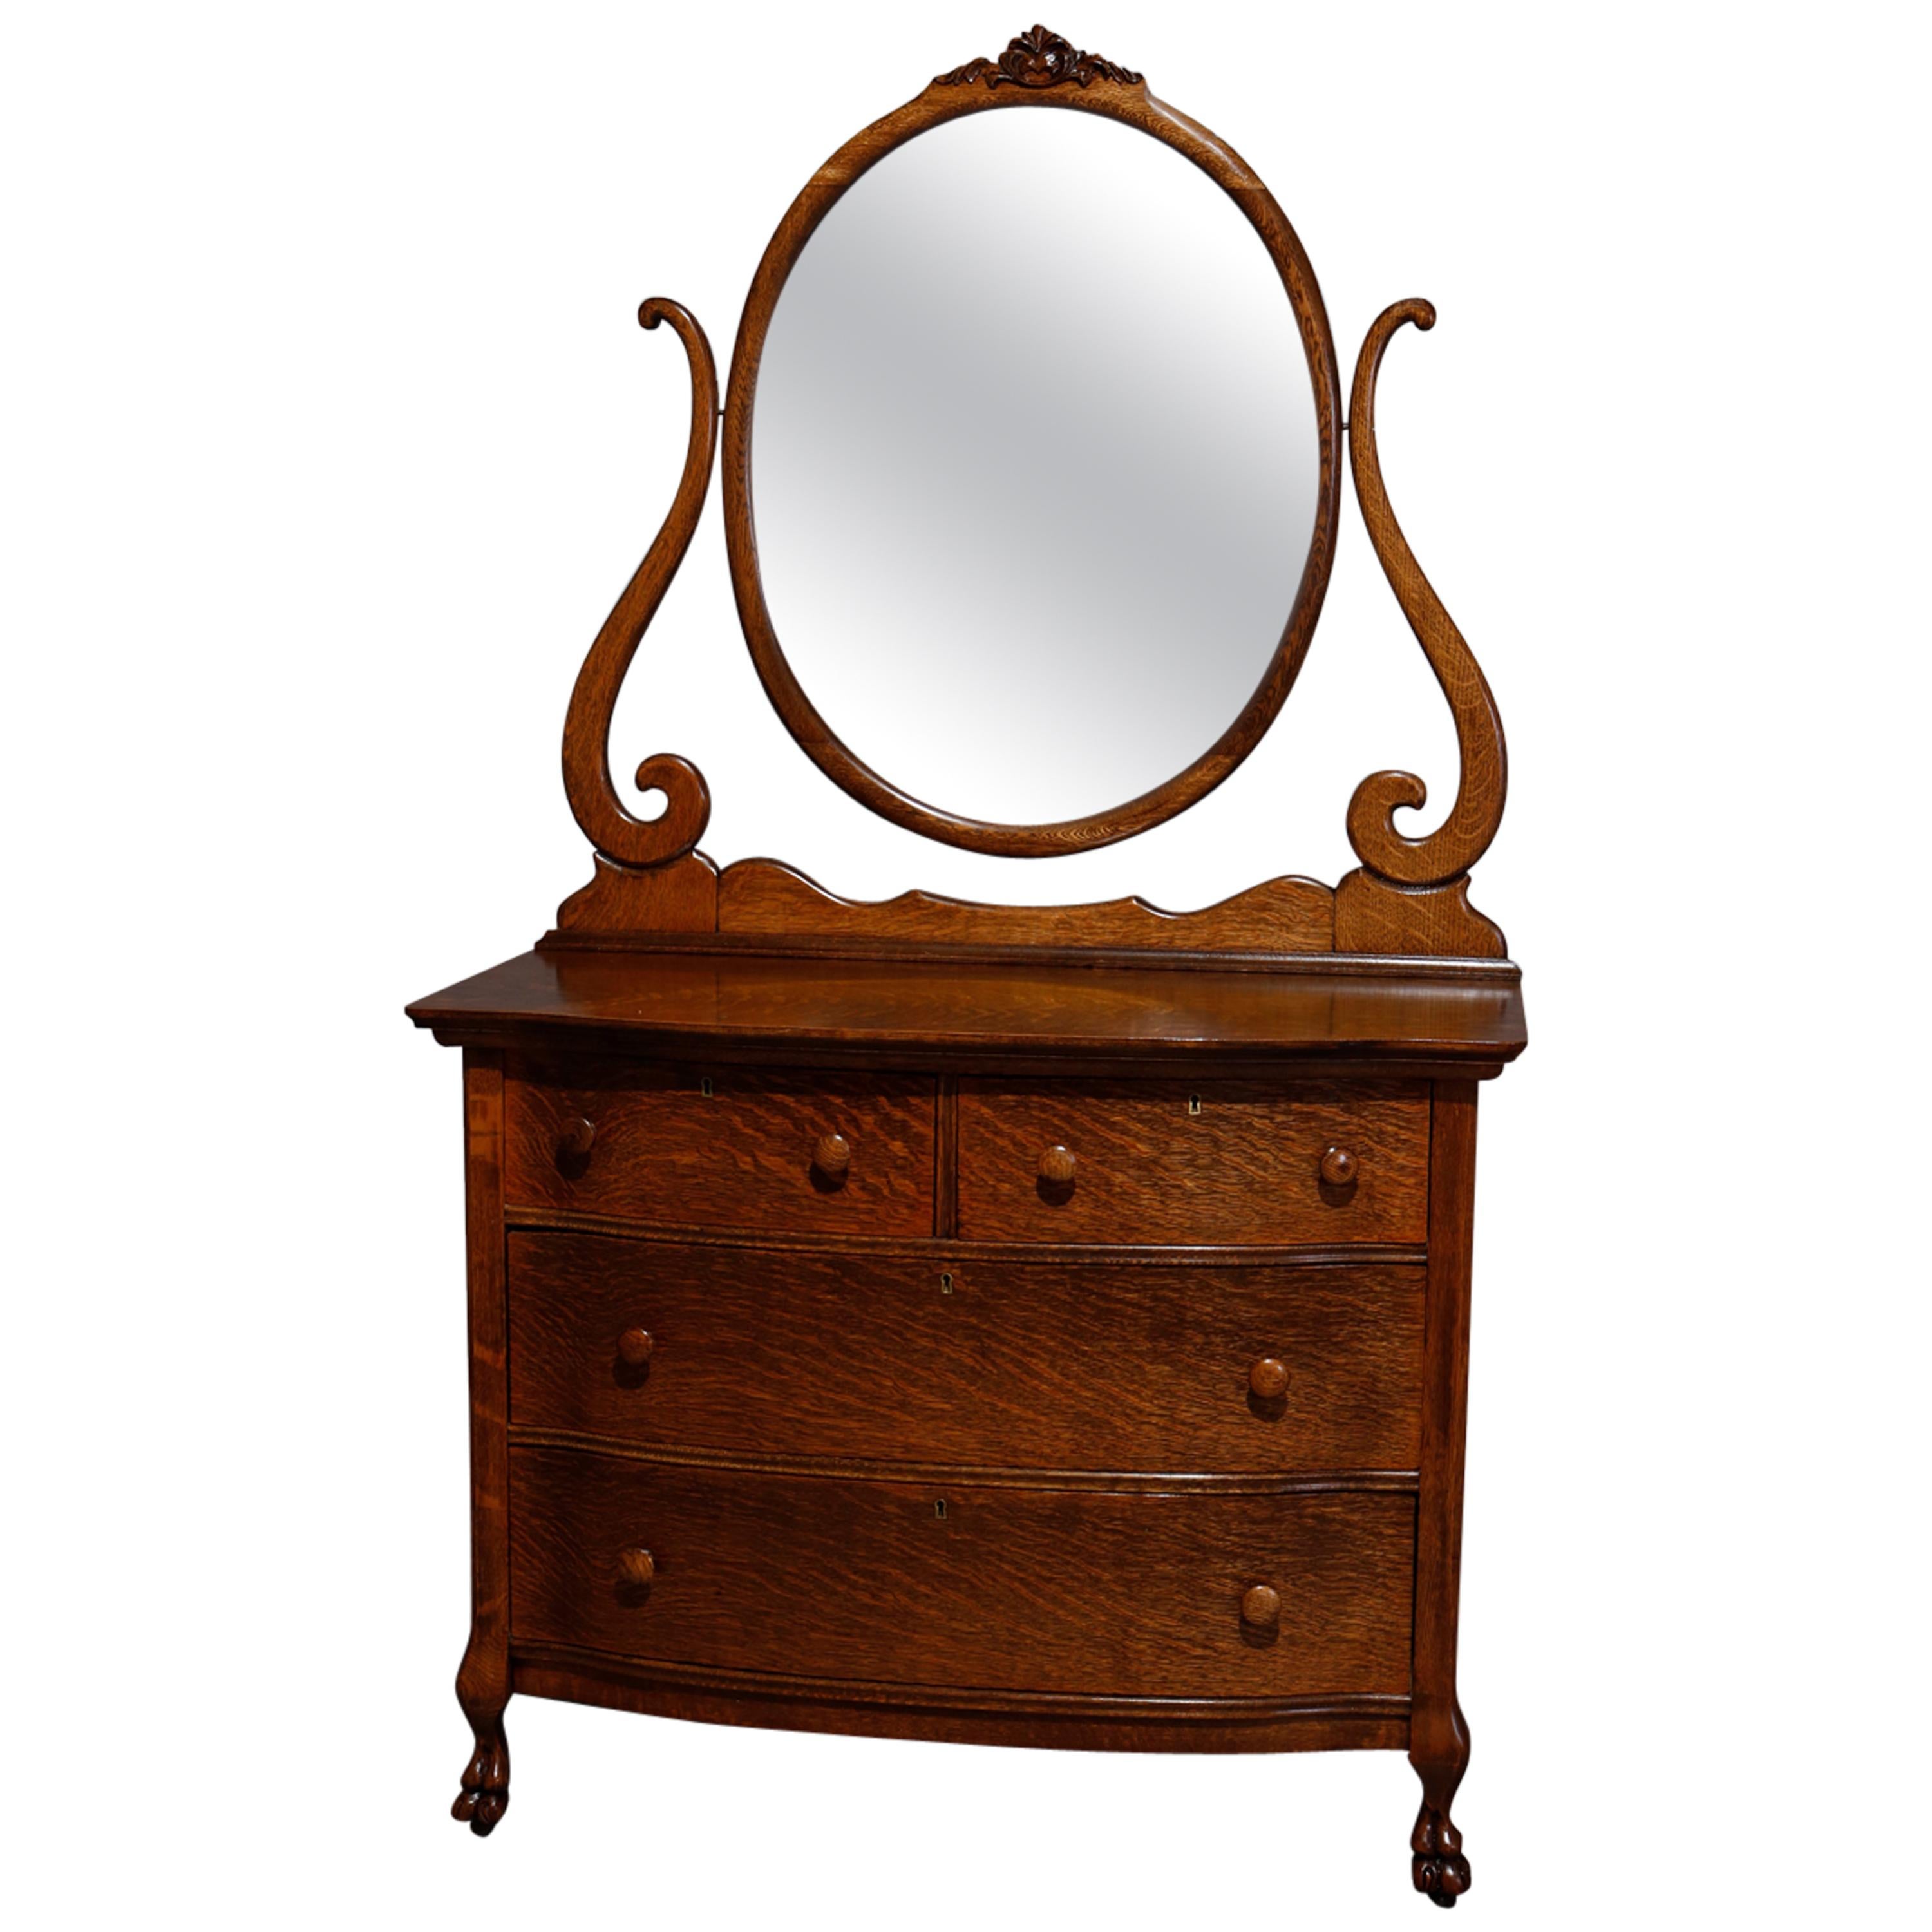 Antique R. J. Horner Style Bow Front Oak Chest of Drawers with Mirror circa 1920